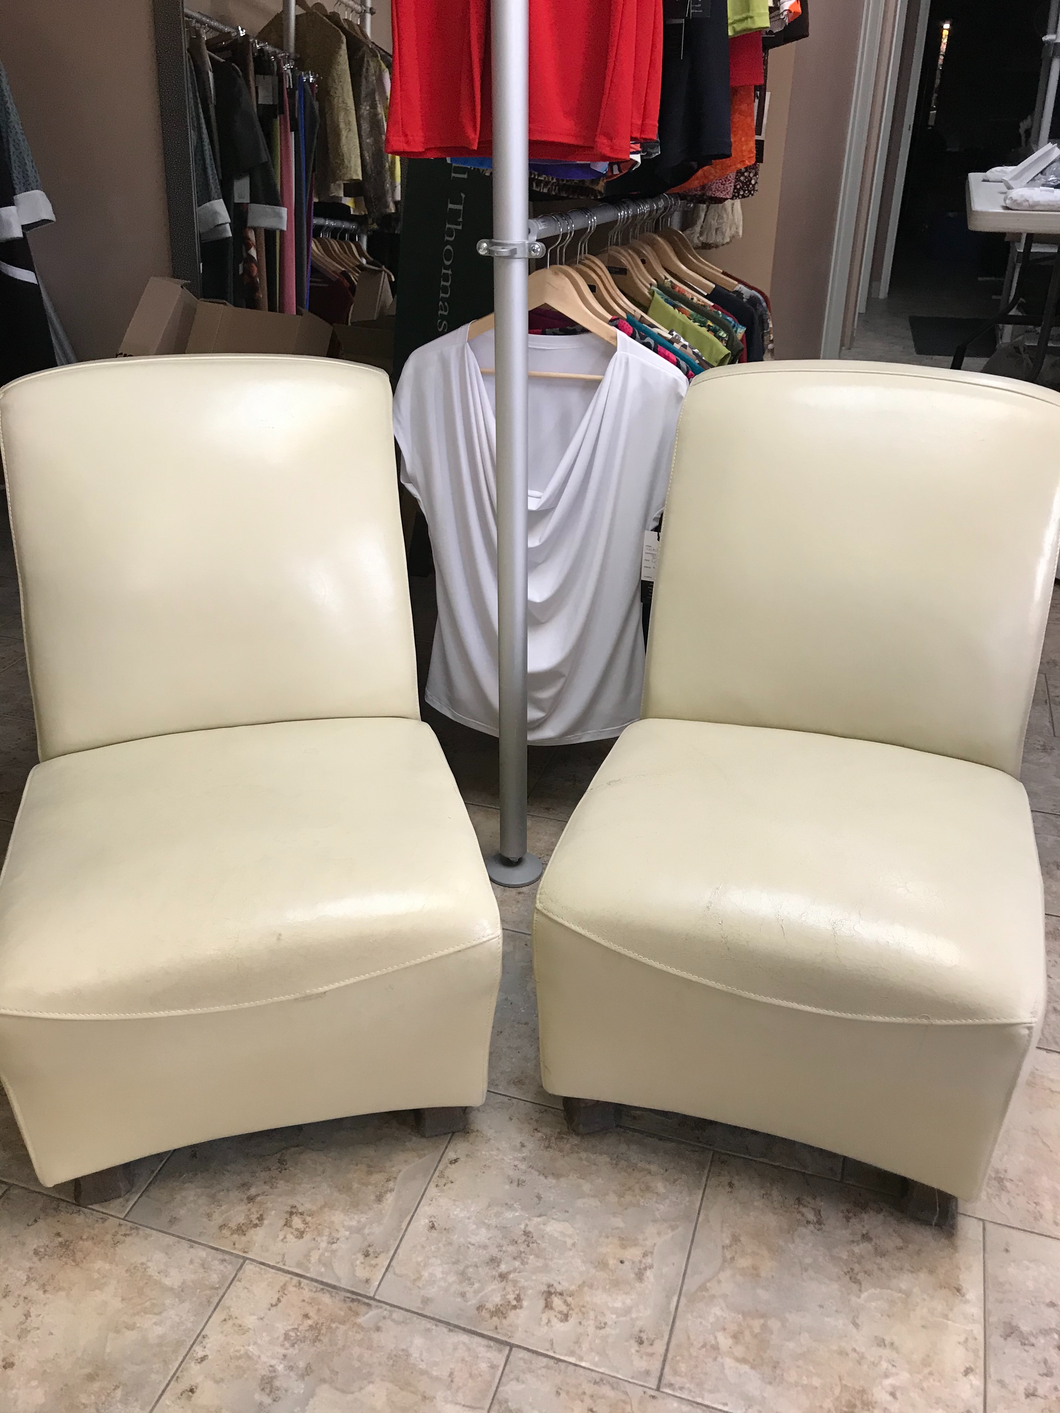 Leather Slipper Chairs. 2x Available